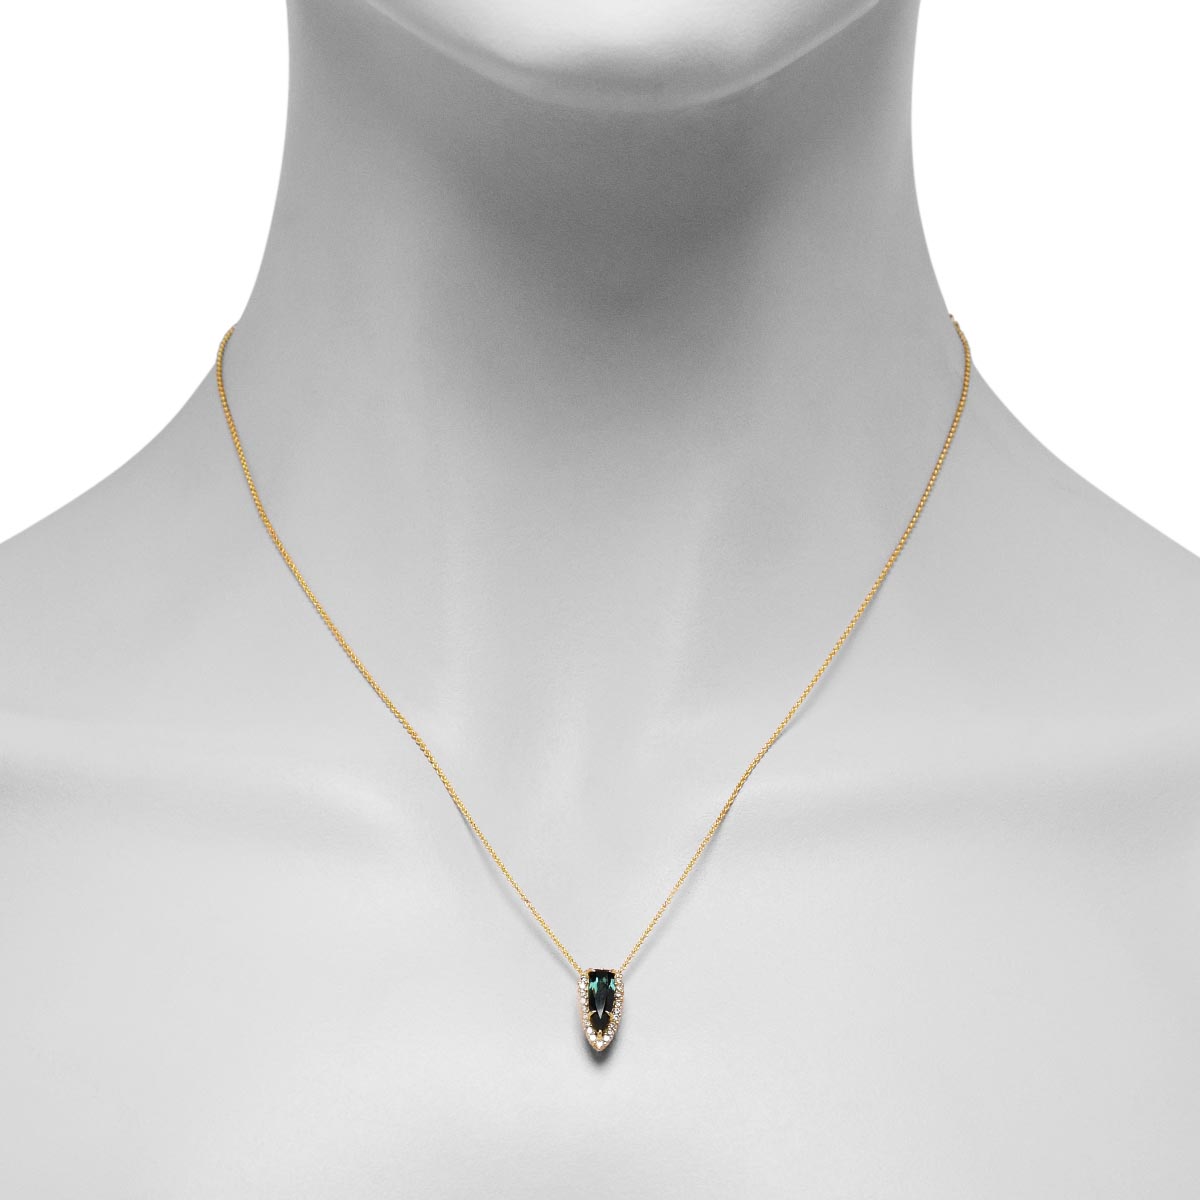 Maine Green Tourmaline Necklace in 14kt Yellow Gold with Diamonds (1/5ct tw)